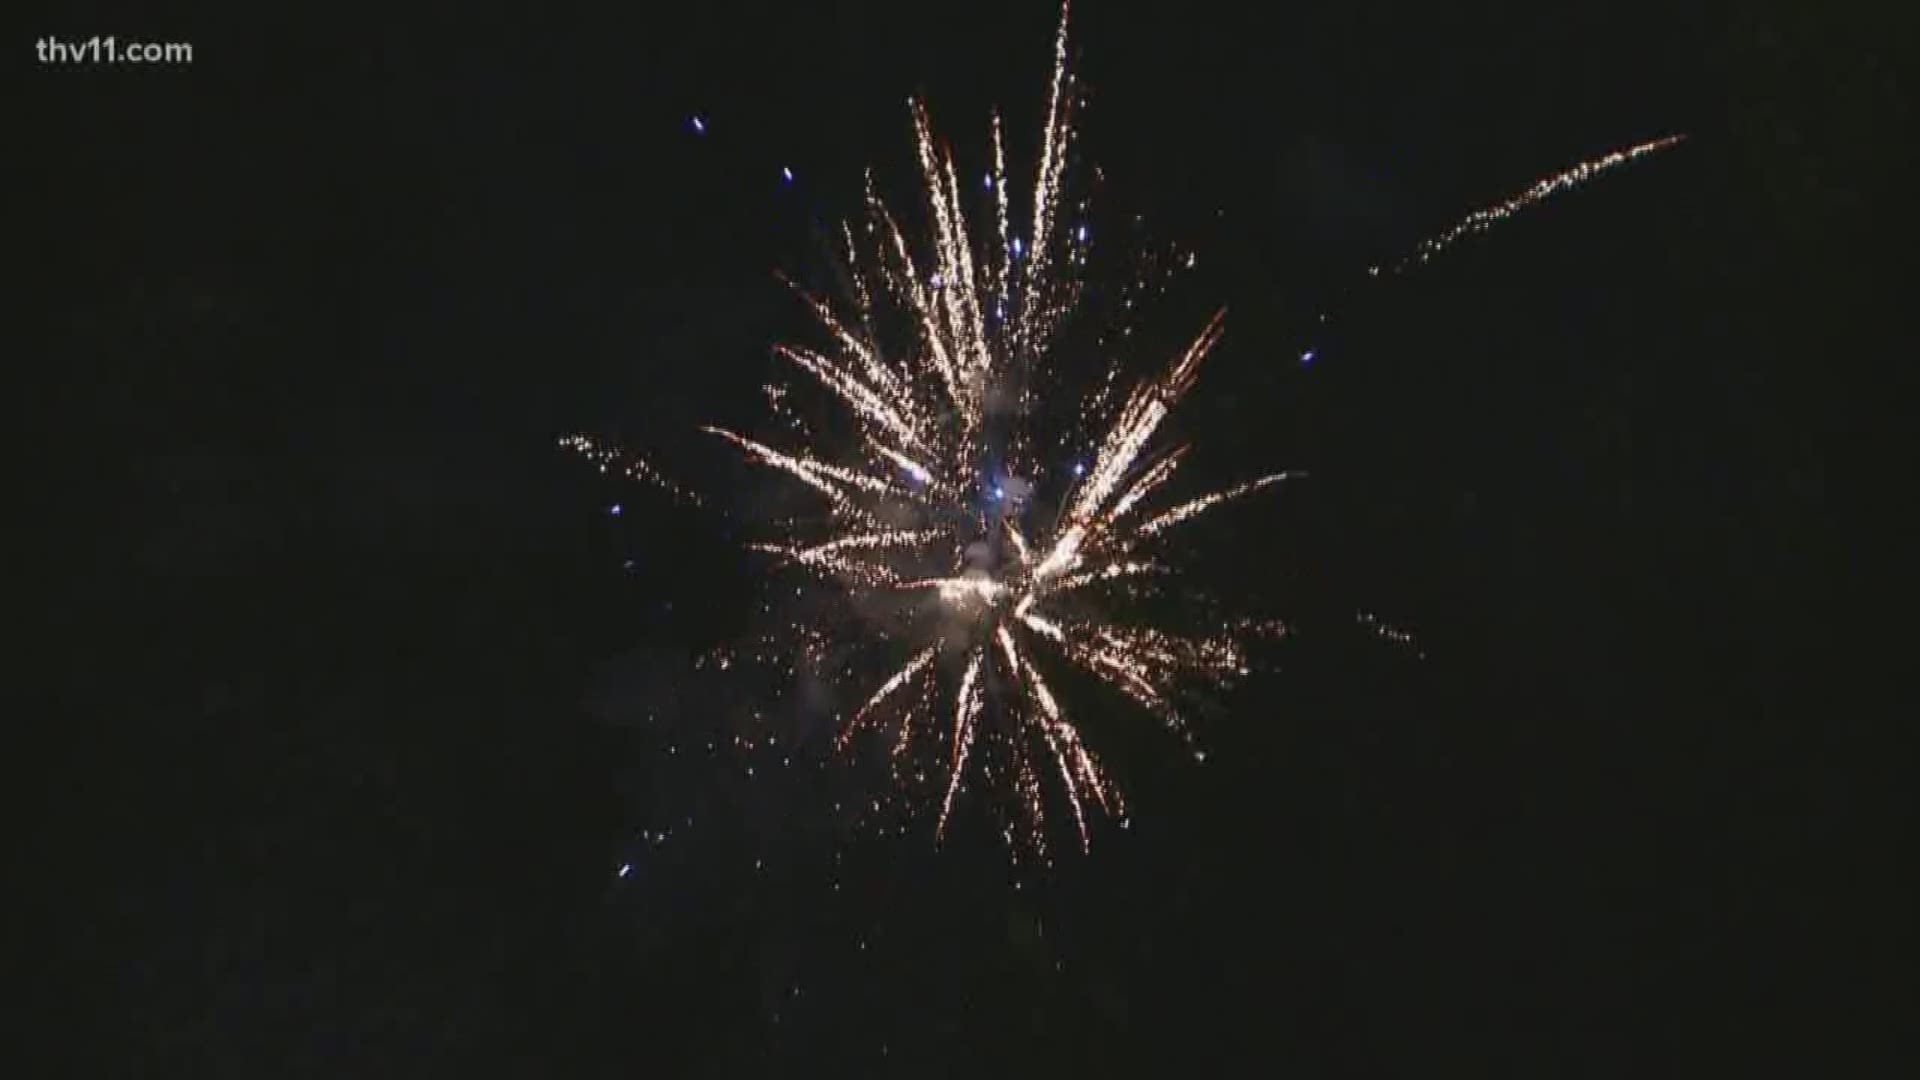 It's the 35th year for Pops on the River, the largest July 4th Celebration in Central Arkansas. THV11's Michael Aaron shows us the sights and sounds.